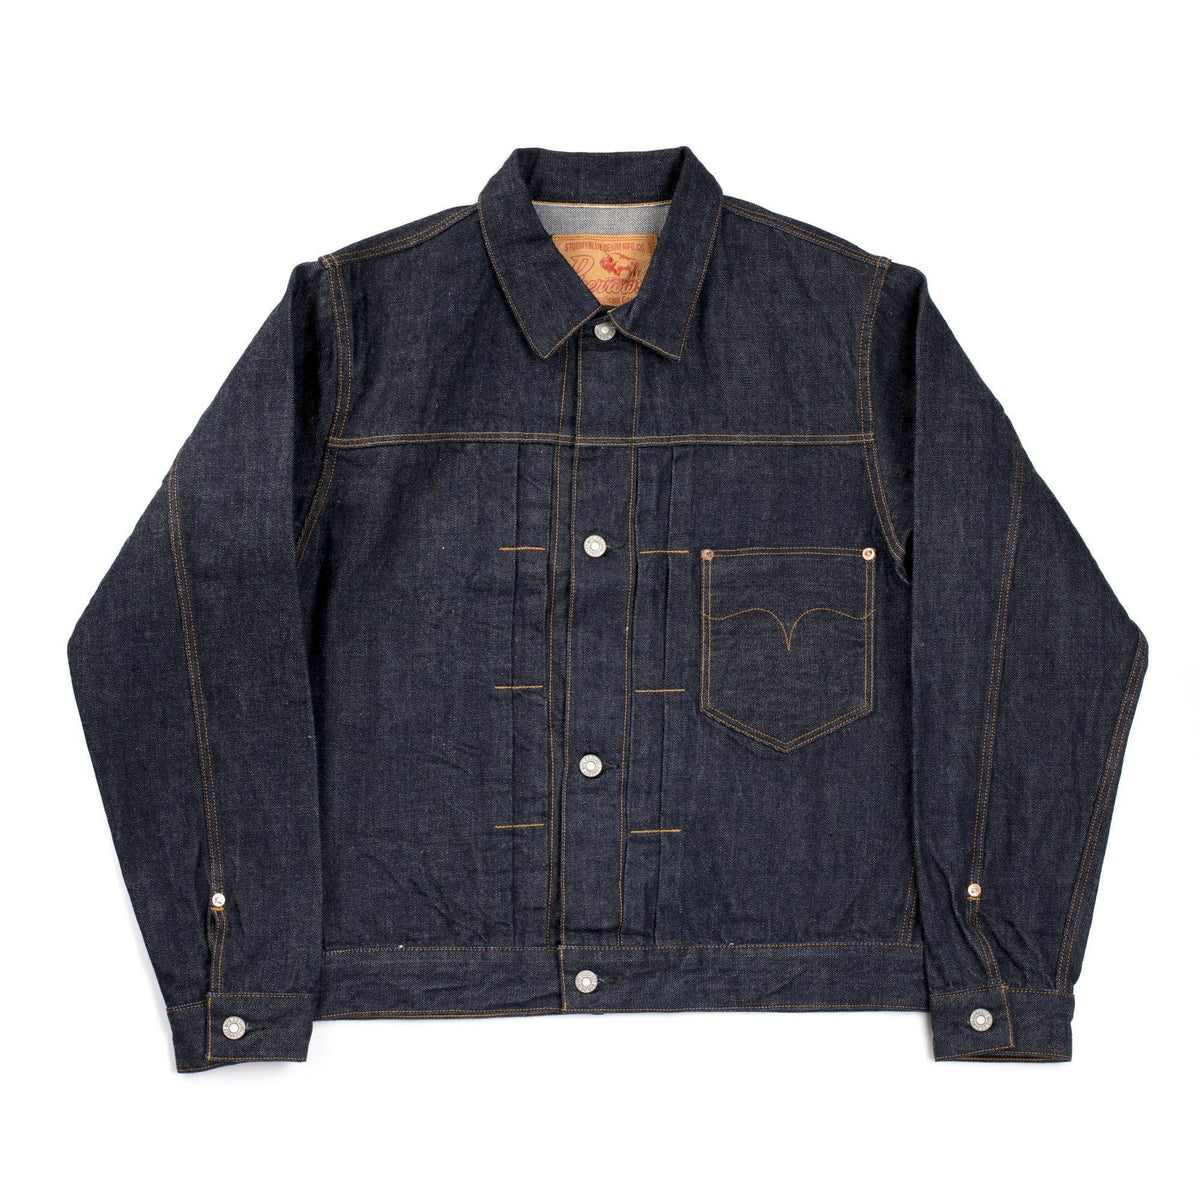 Buy Denim Jackets From These Places | LBB, Kolkata